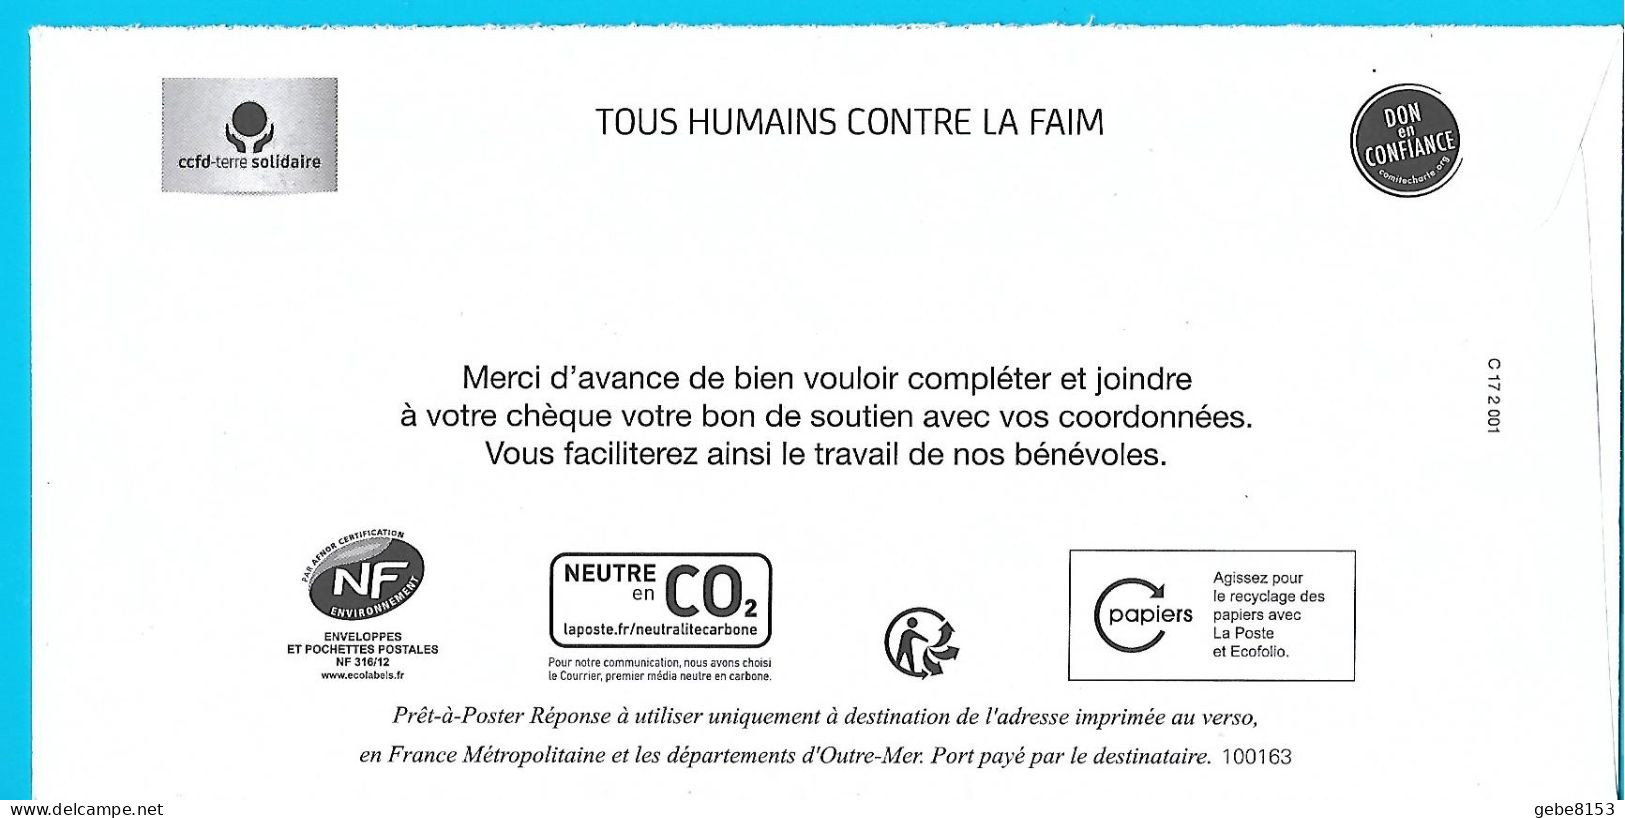 PostRéponse Lettre Prioritaire Marianne Ciappa CCFD Terre Solidaire Toshiba - PAP: Ristampa/Ciappa-Kavena